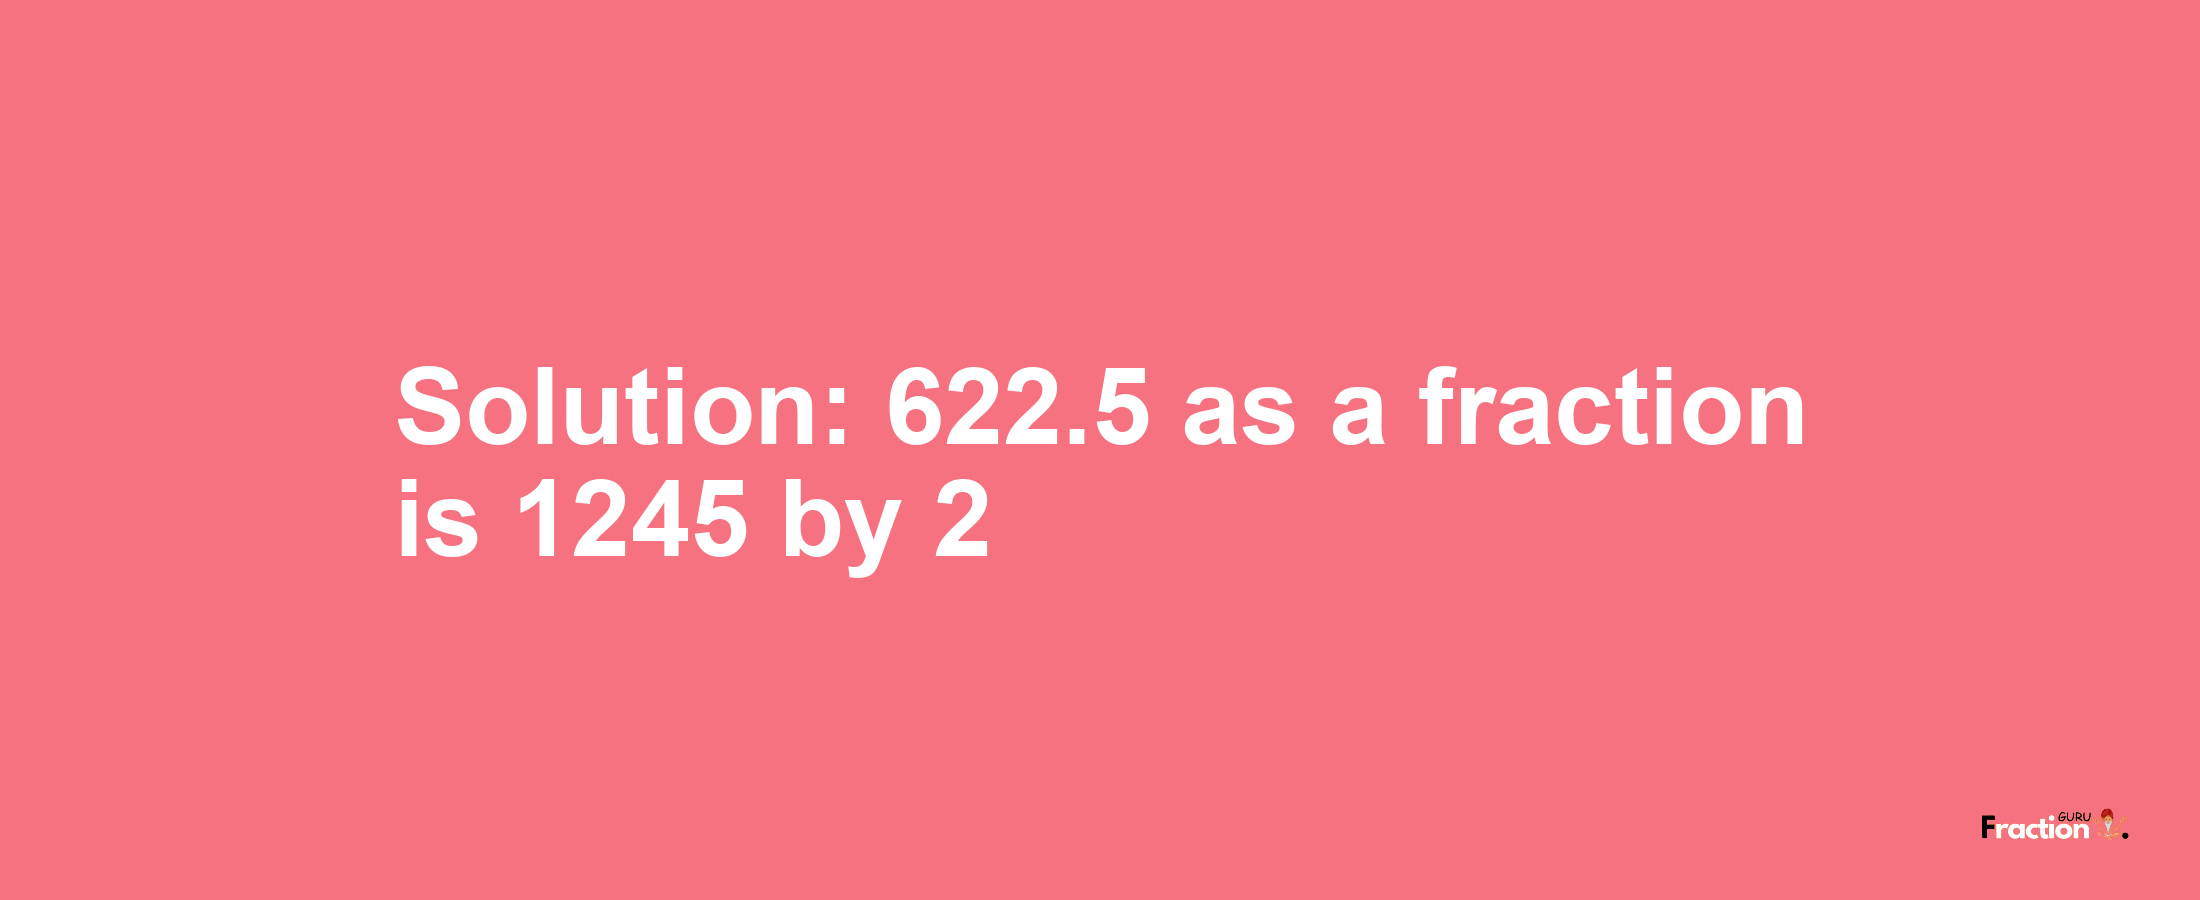 Solution:622.5 as a fraction is 1245/2